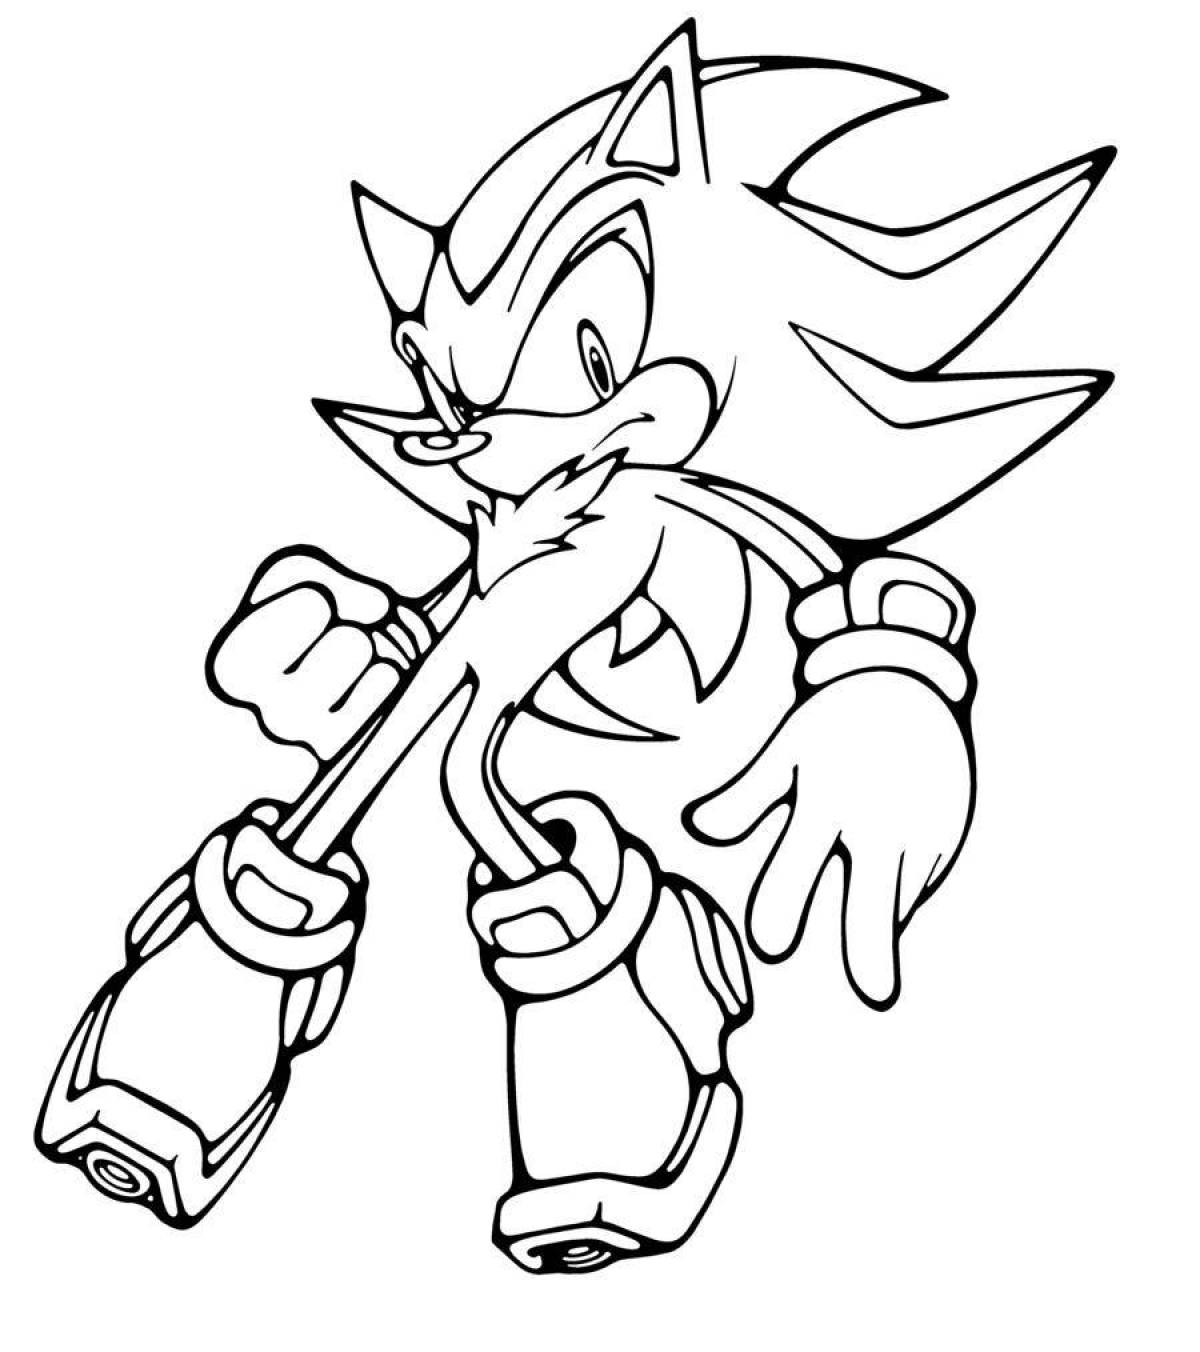 Amazing xs sonic coloring page